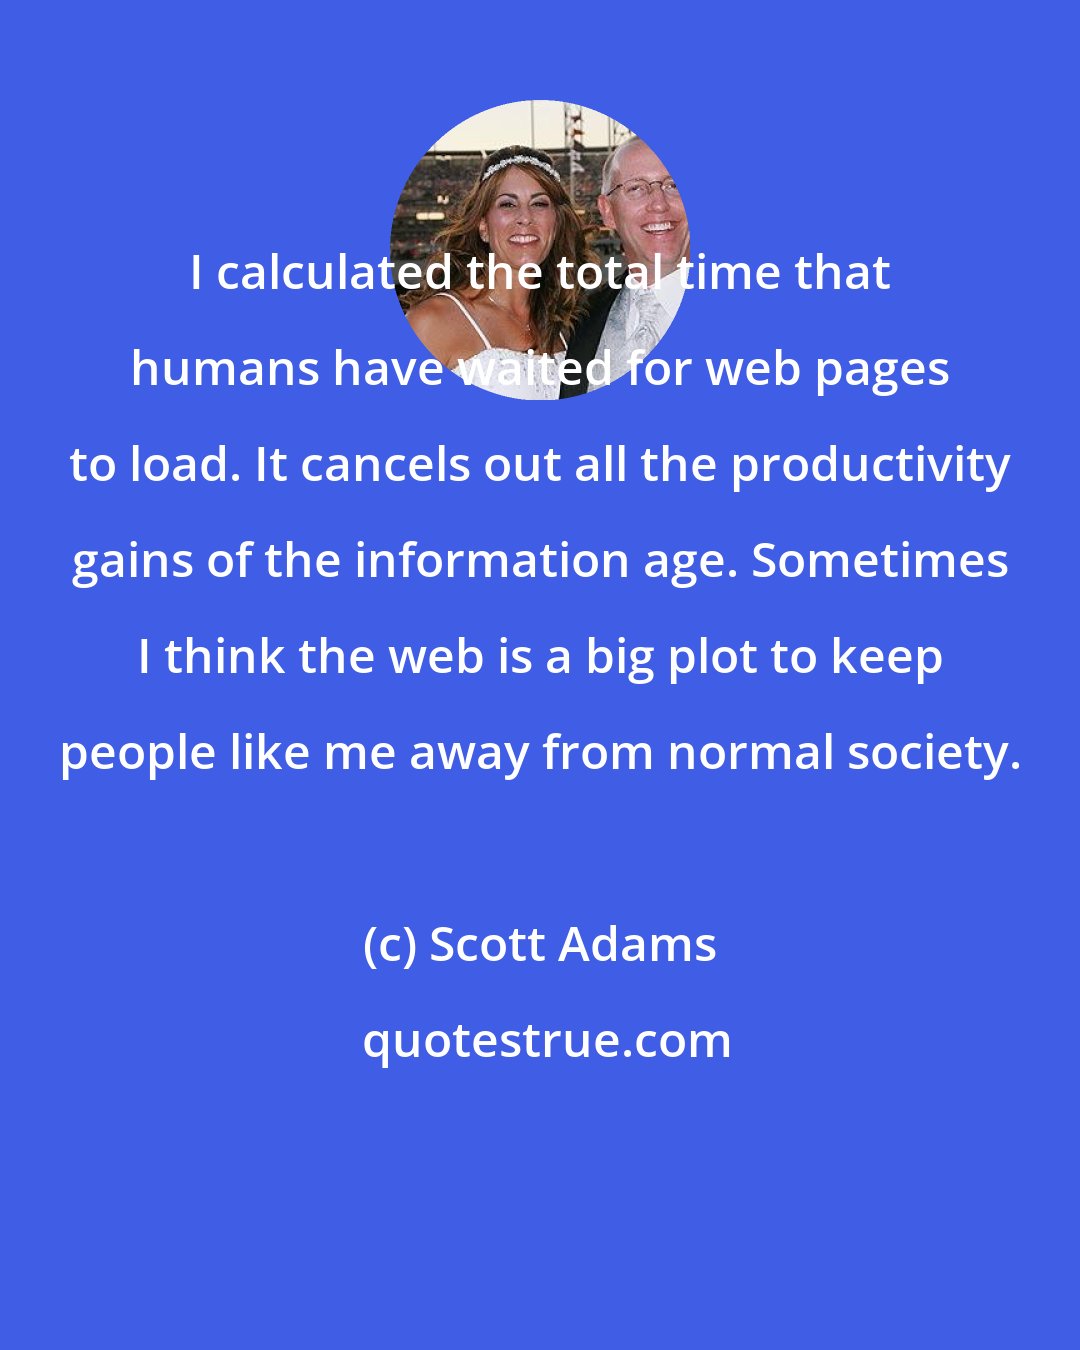 Scott Adams: I calculated the total time that humans have waited for web pages to load. It cancels out all the productivity gains of the information age. Sometimes I think the web is a big plot to keep people like me away from normal society.